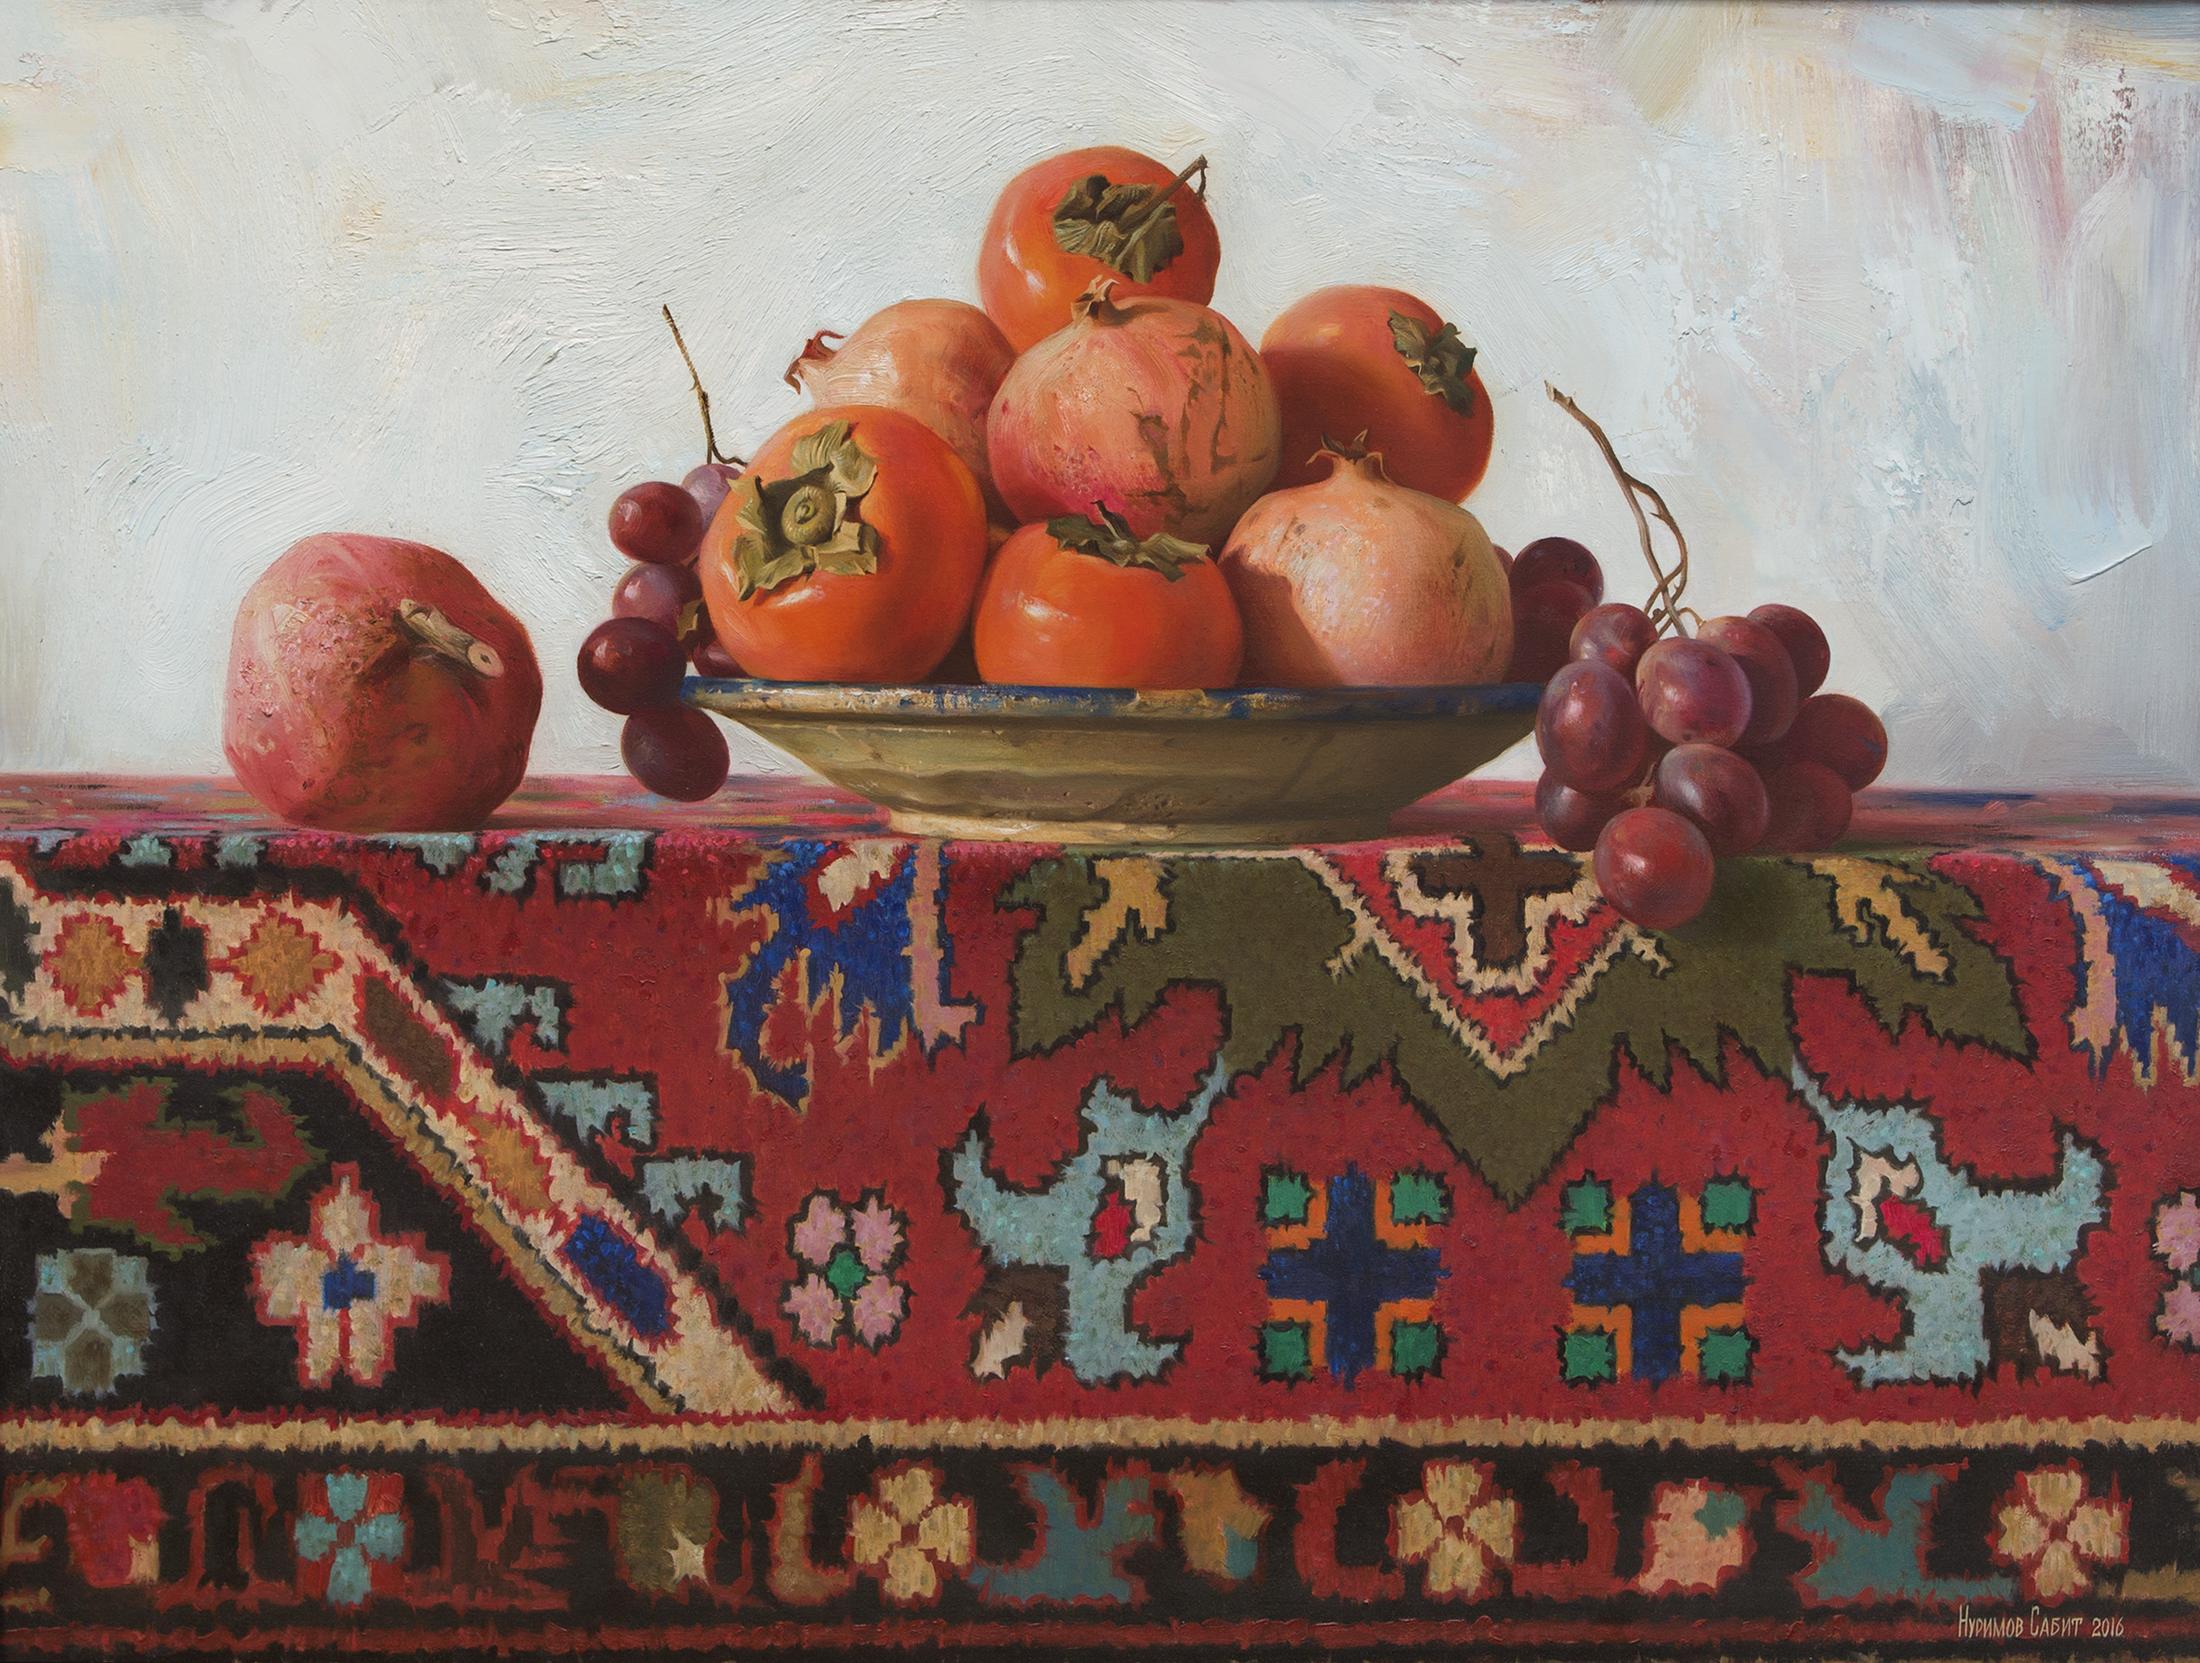 Persimmons and pomegranates on the carpet